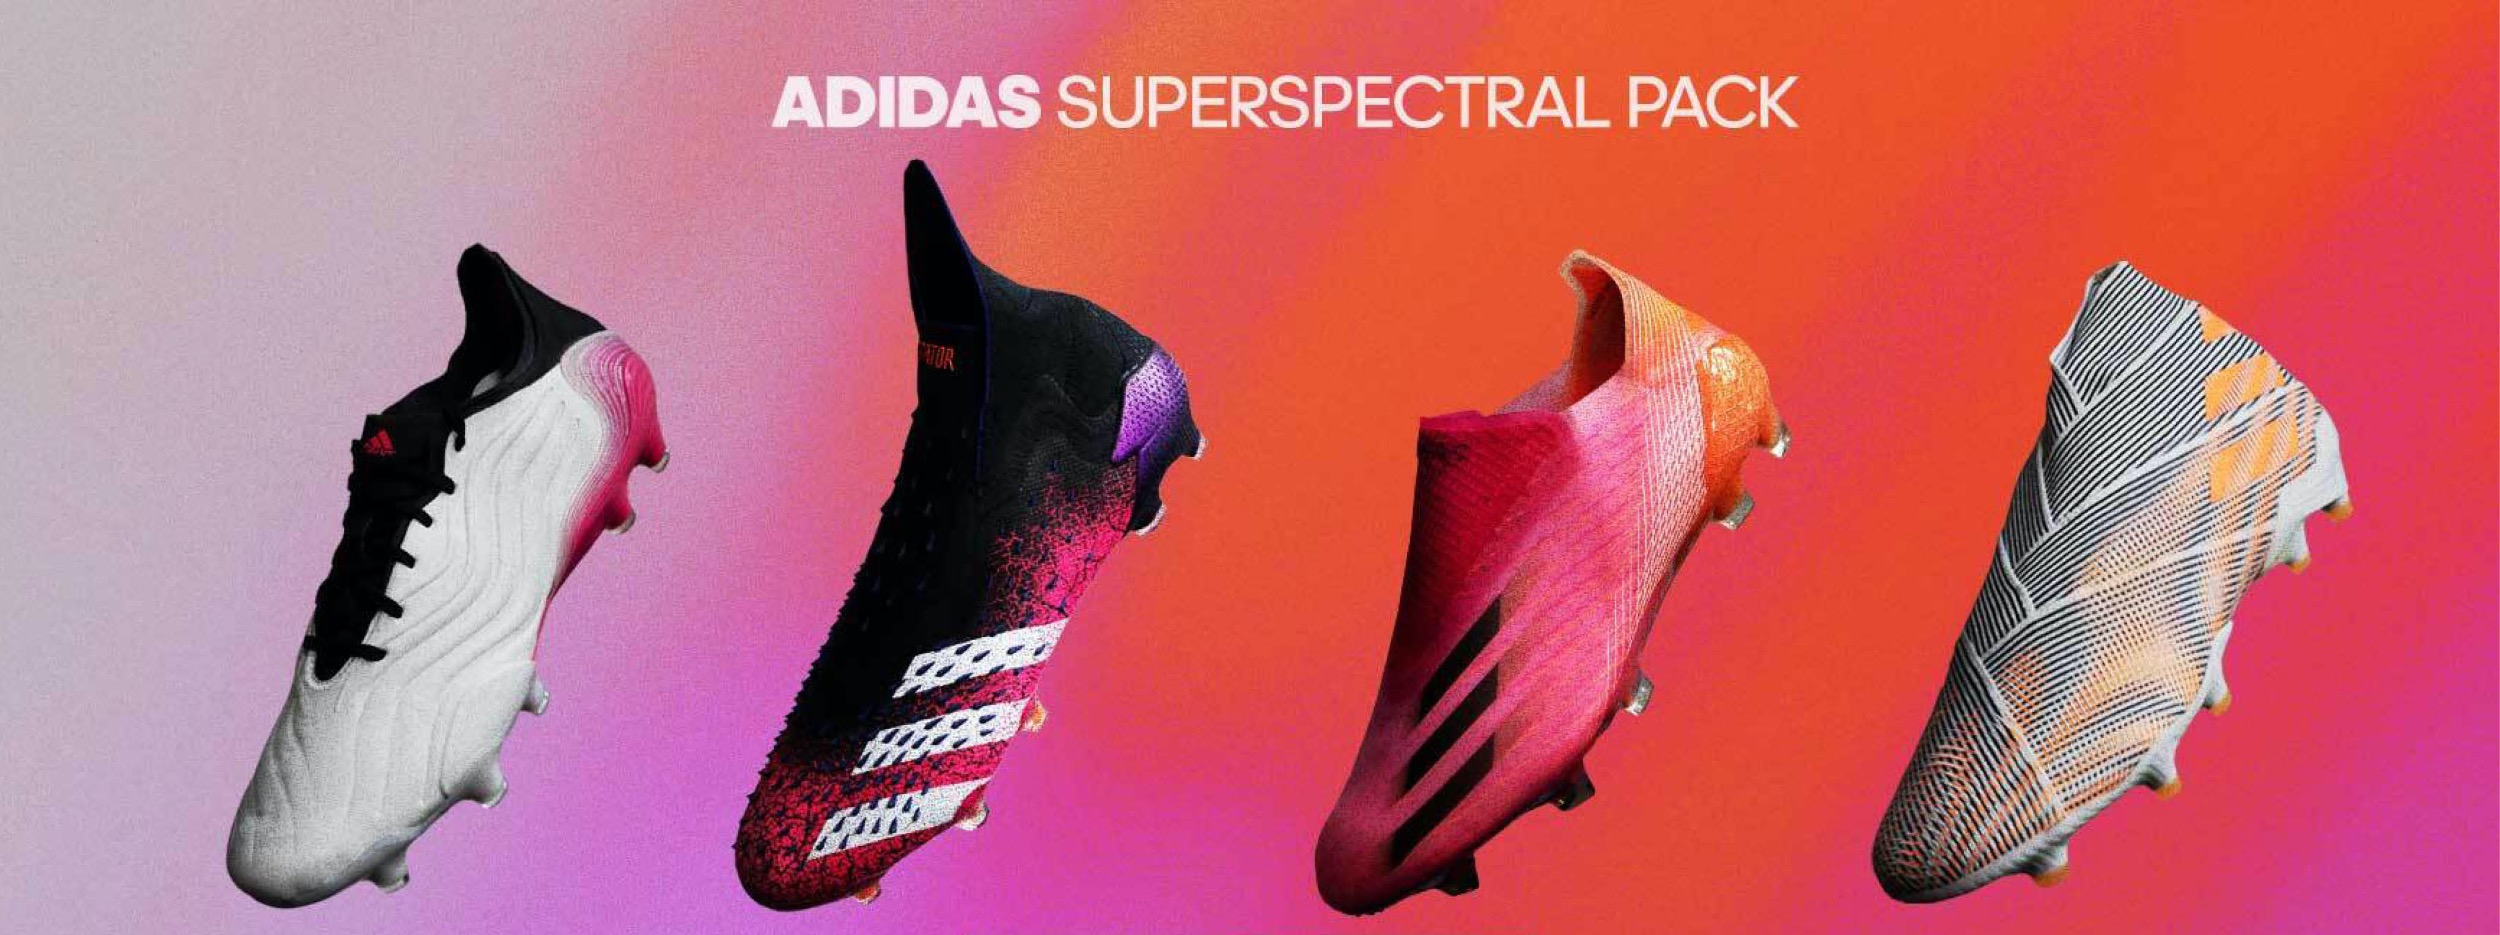 adidas Superspectral Pack